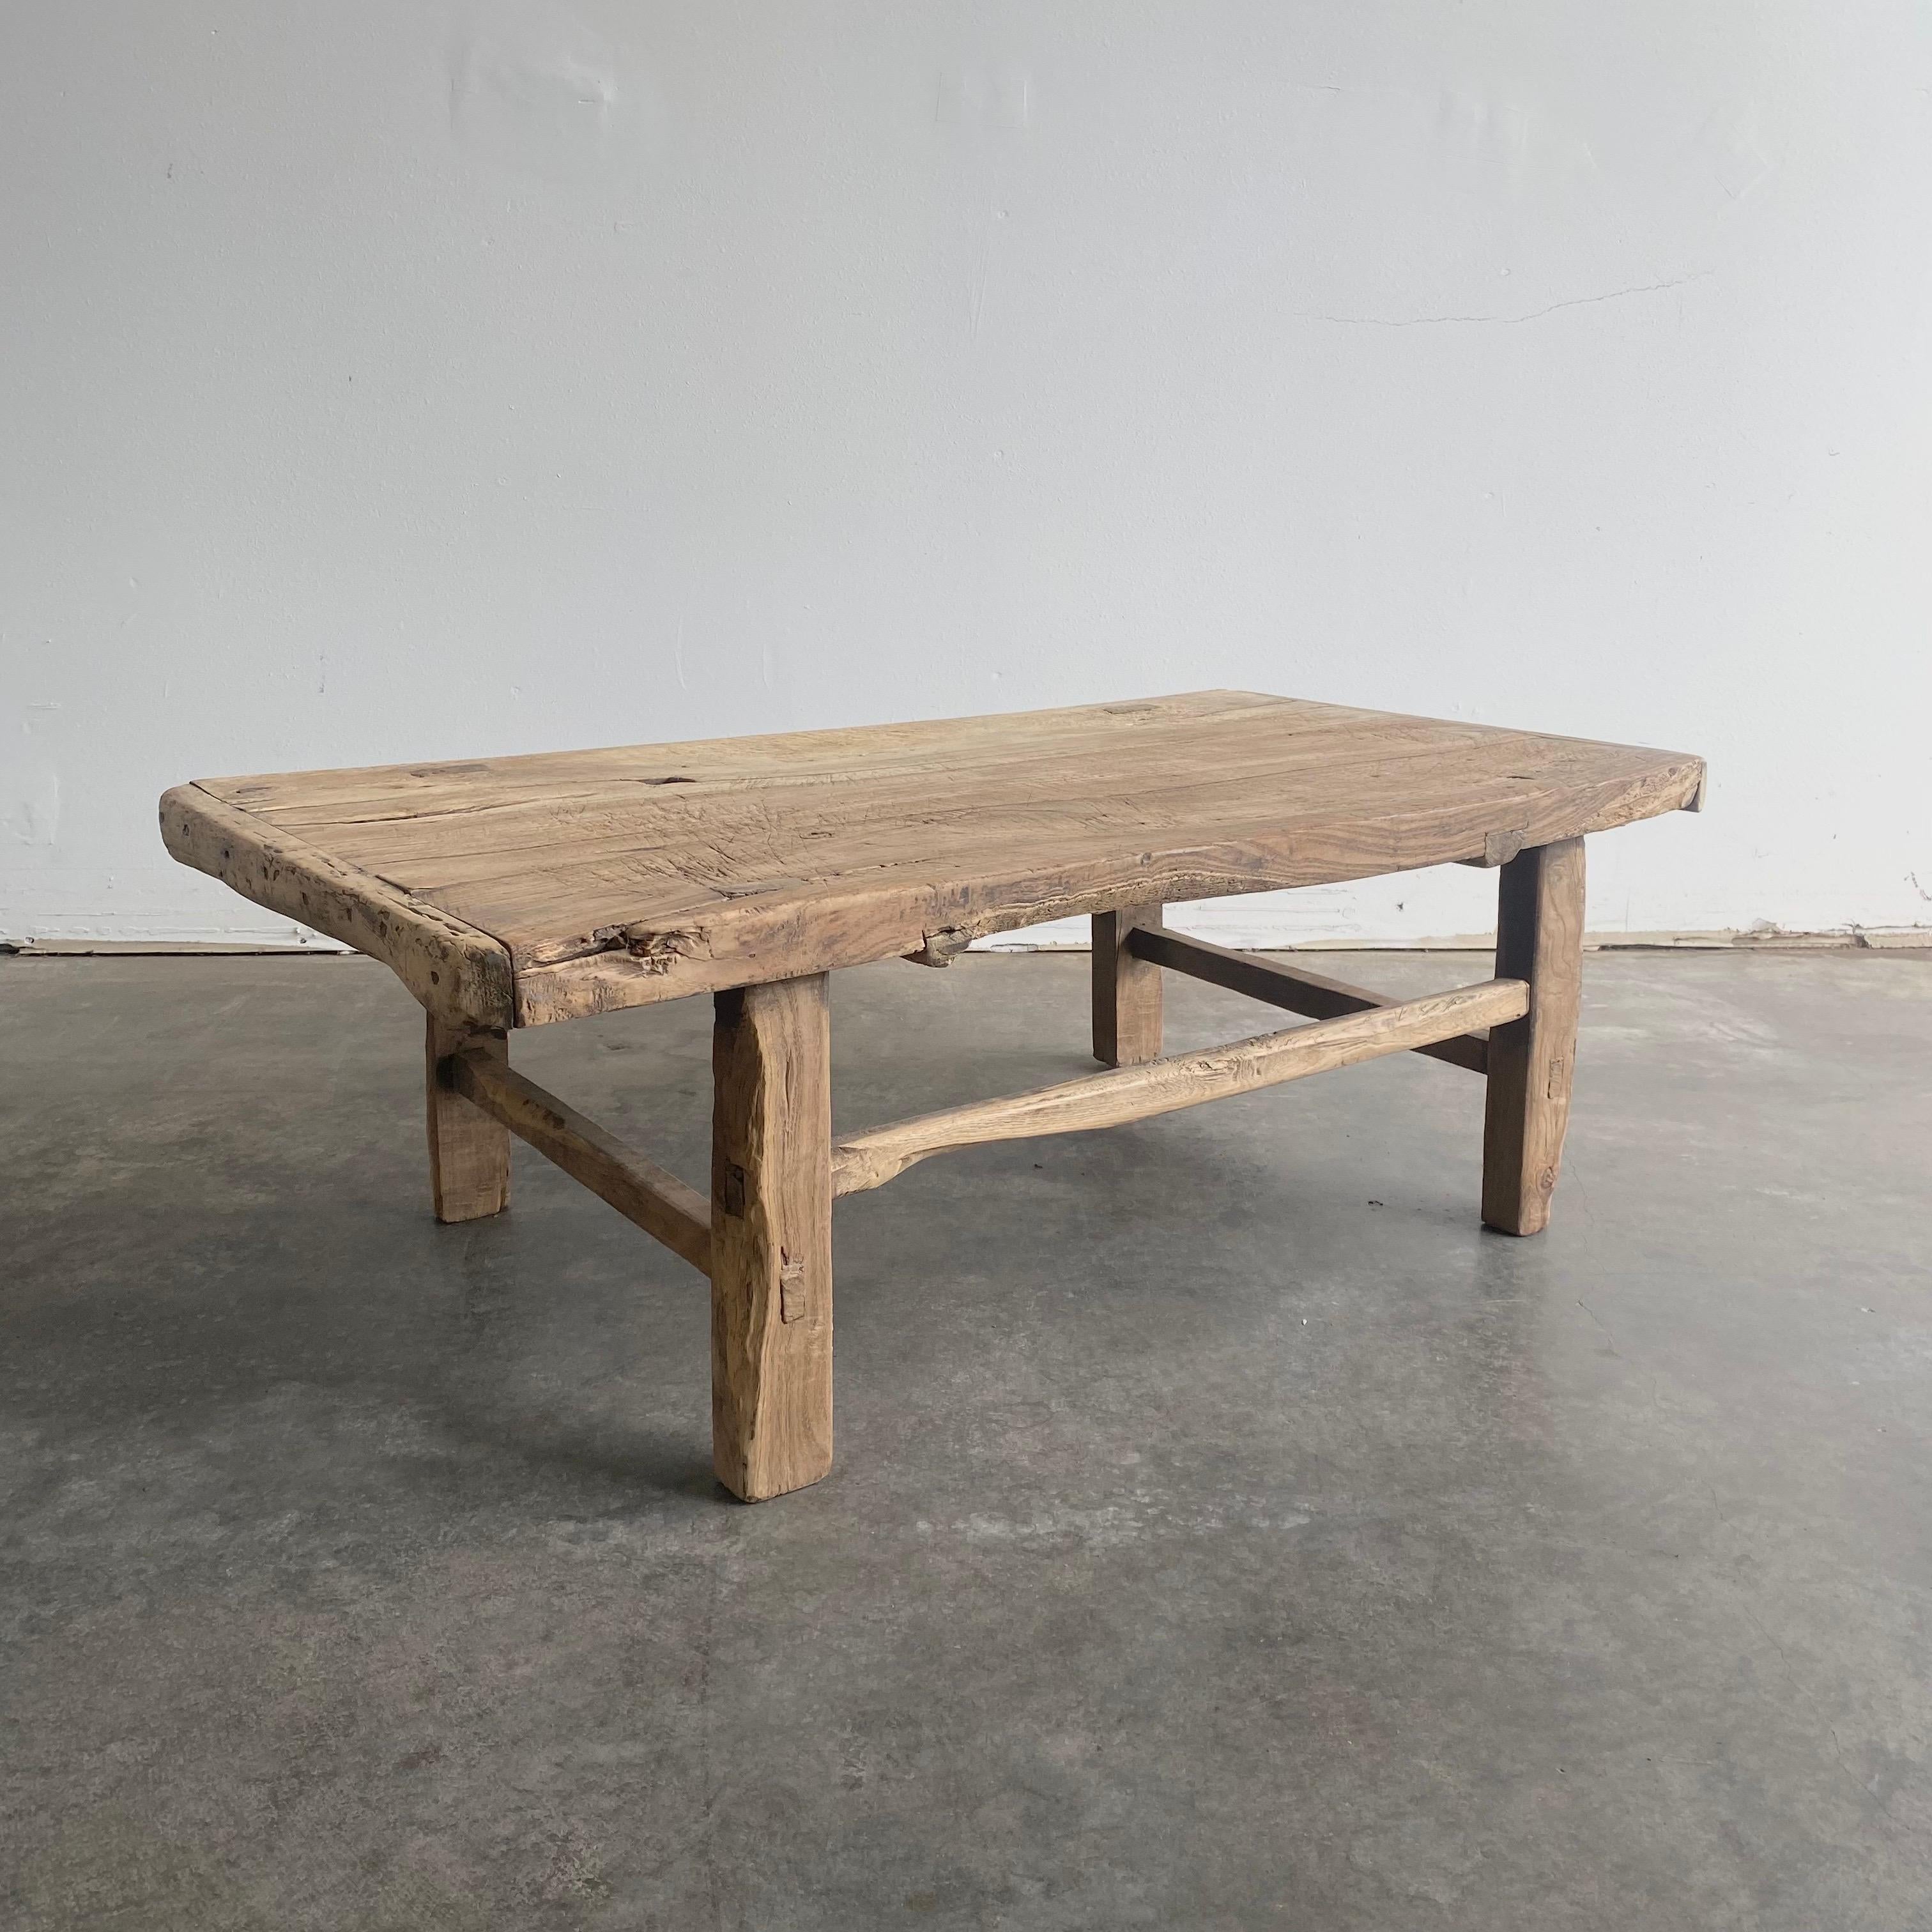 Vintage antique elm wood coffee table with beautiful antique weathered patina top
These are the real vintage antique elm wood coffee table! Beautiful antique patina, with weathering and age, these are solid and sturdy ready for daily use, use as a